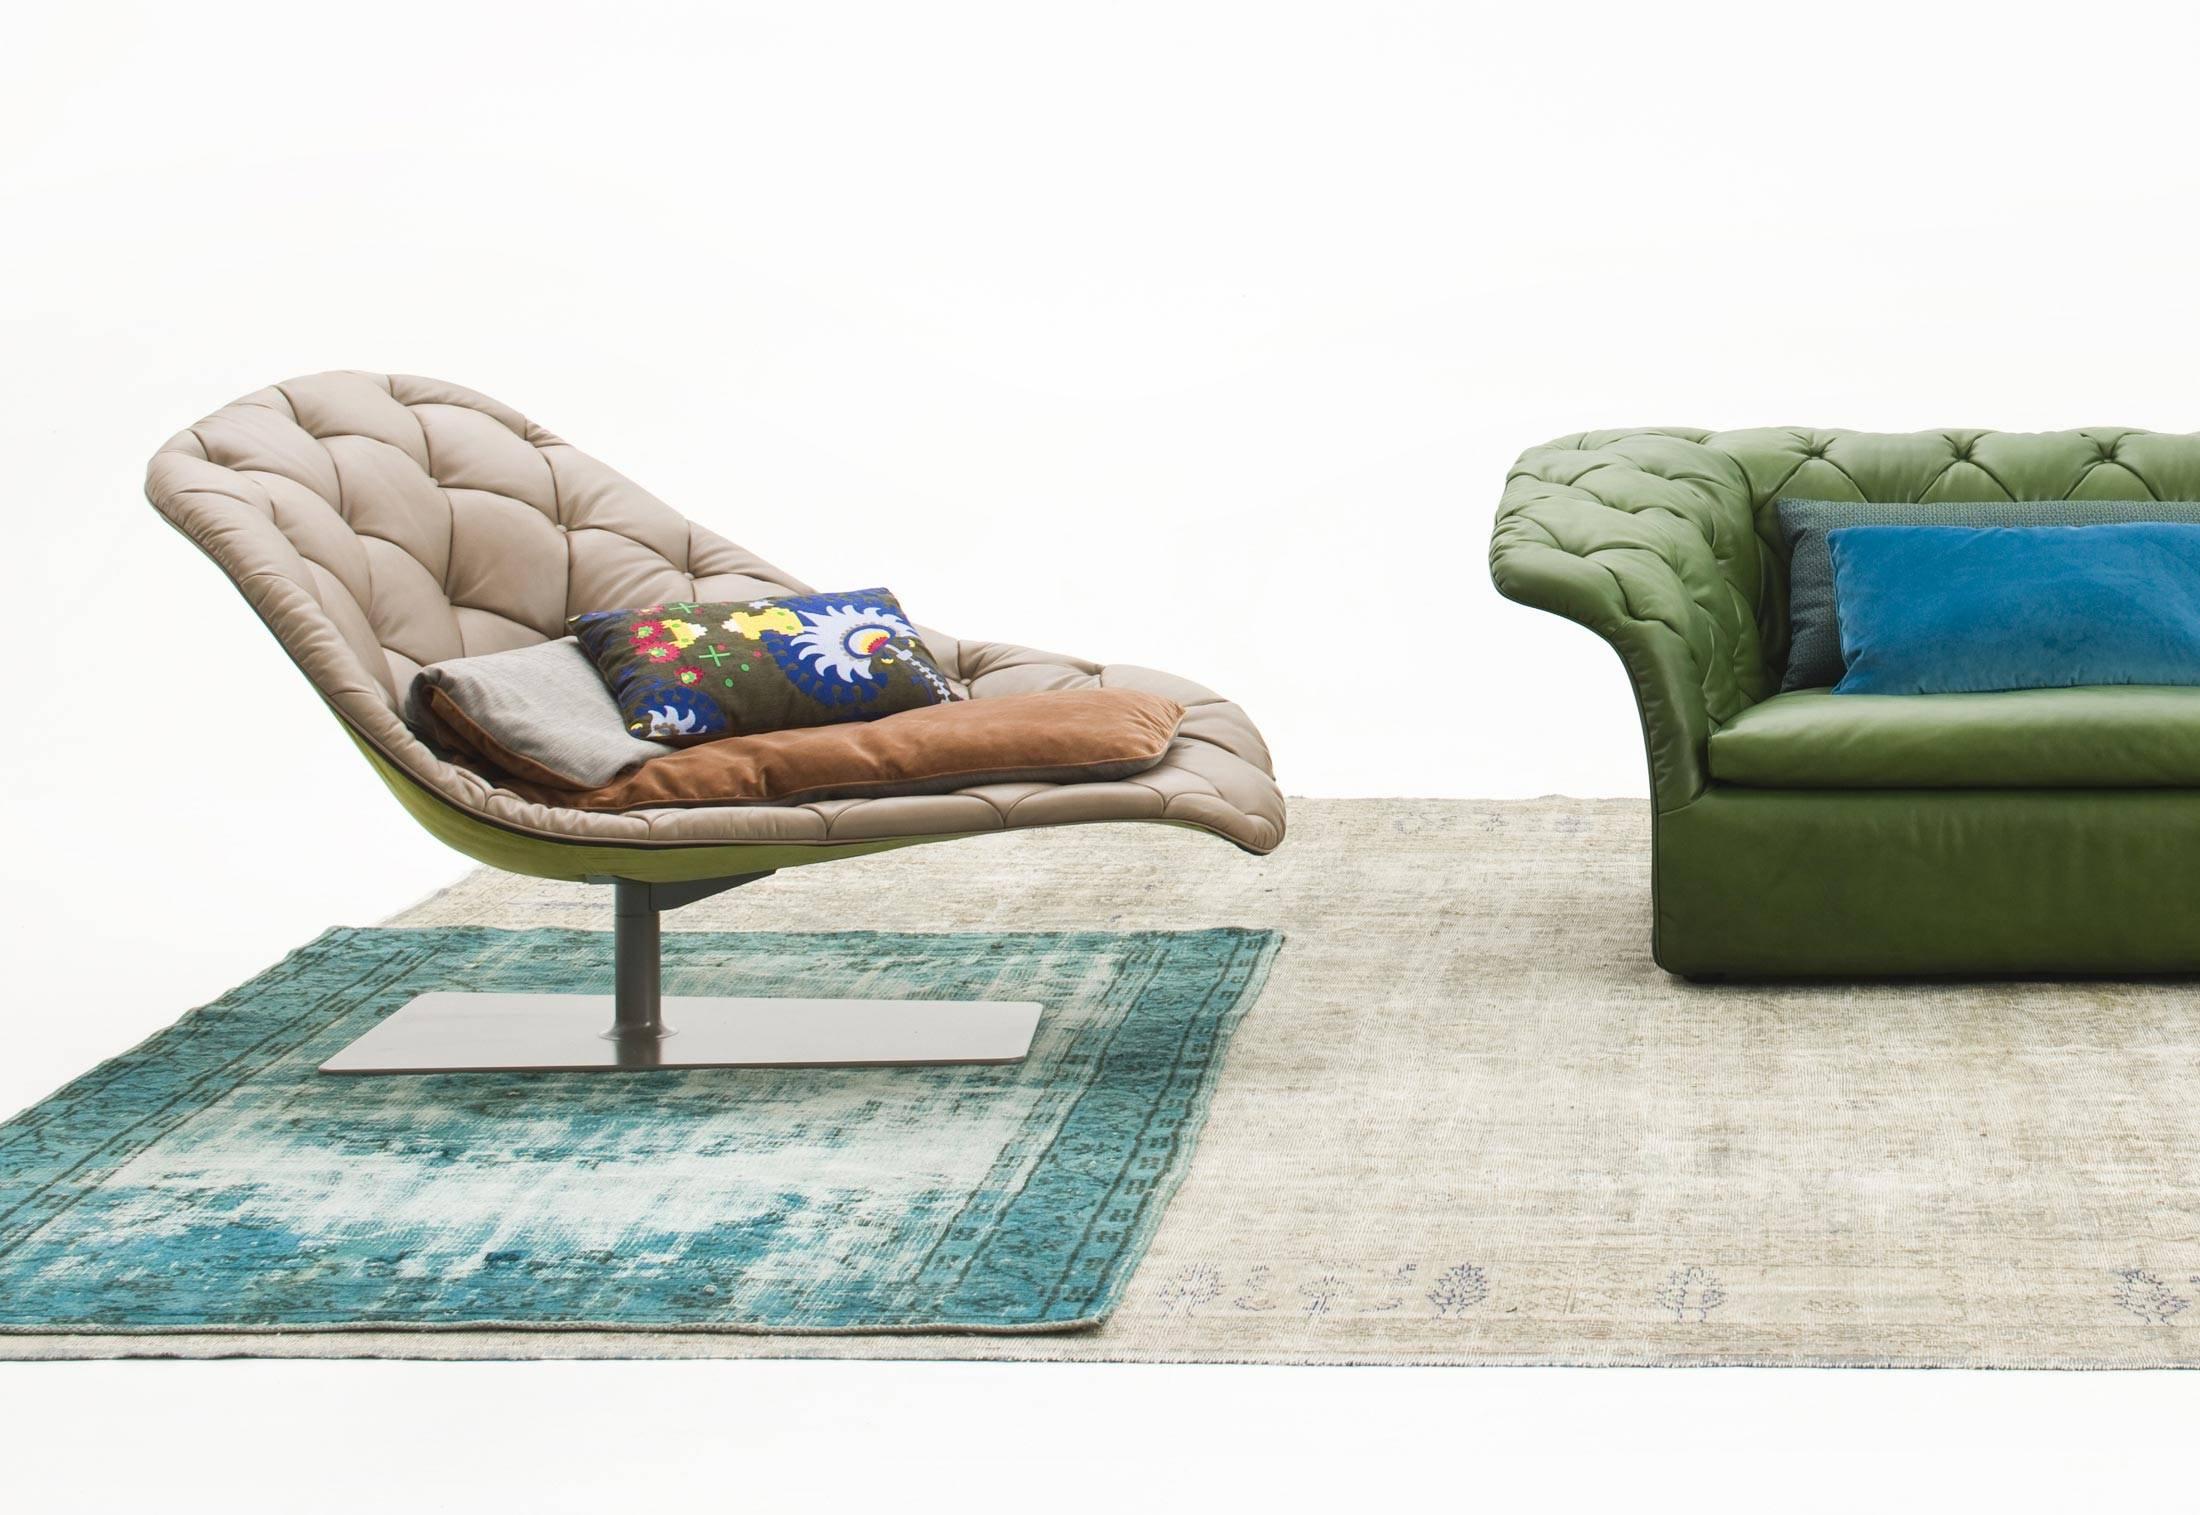 Contemporary Moroso Bohemian Three-Seat Sofa in Tufted Leather by Patricia Urquiola For Sale